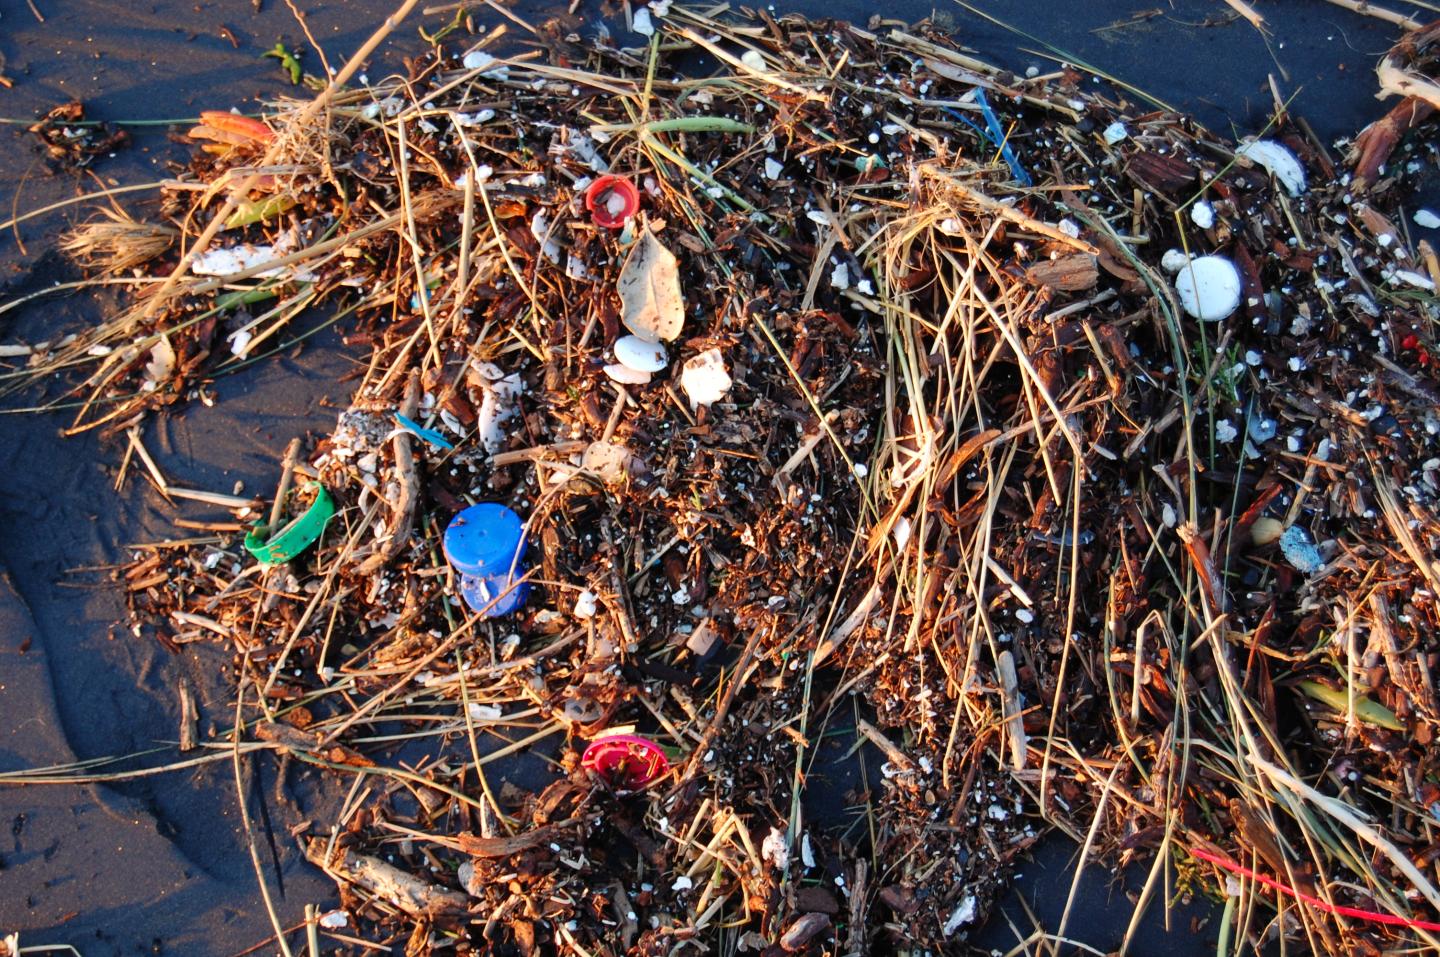 A raft of seaweed and other biomaterial covered in small plastics